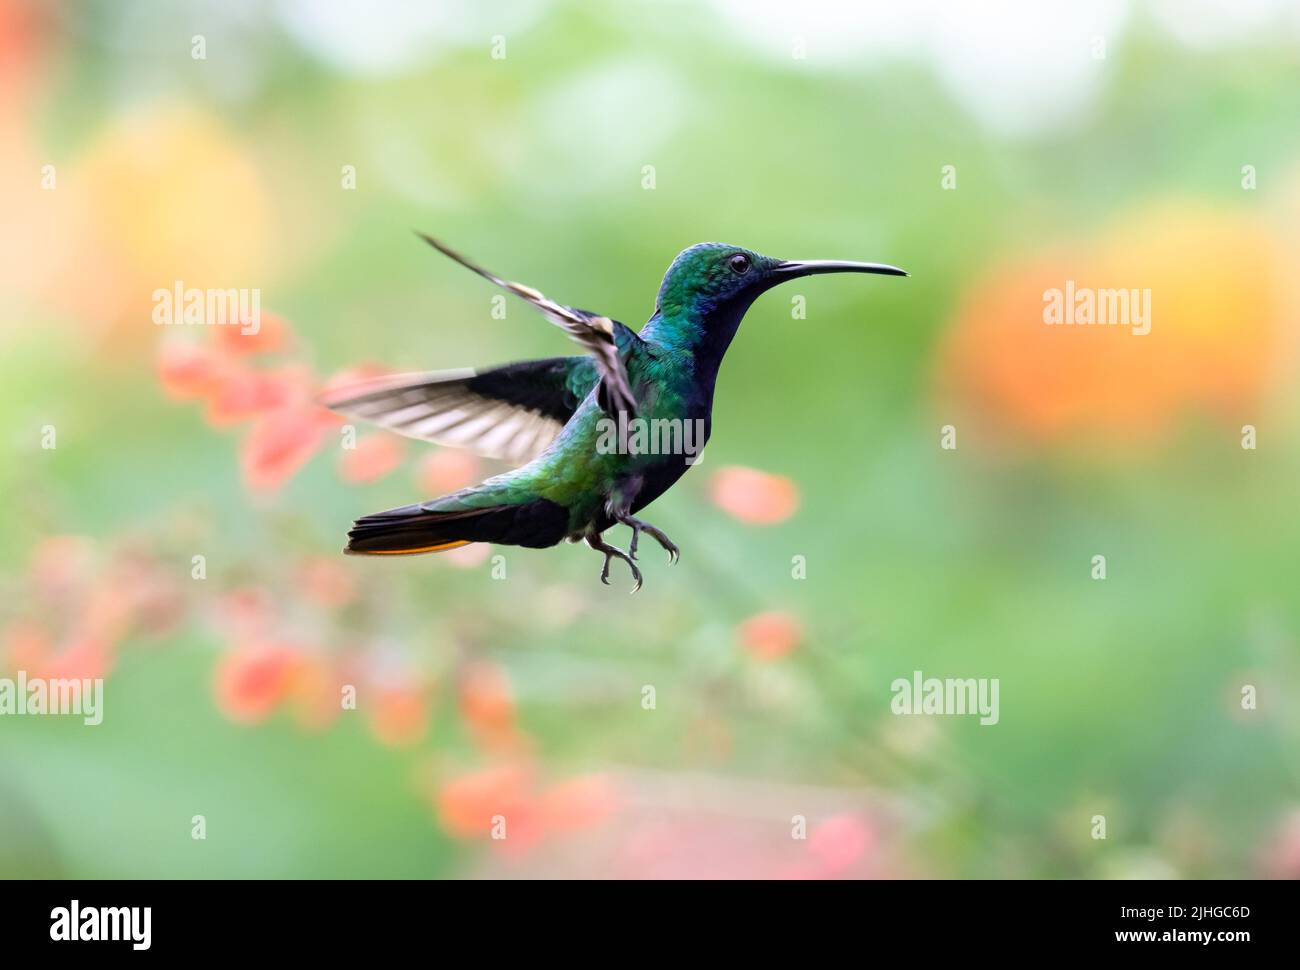 Male Black-throated Mango, Anthracothorax nigricollis, hovering in flight in a garden with colorful blurred background. Stock Photo